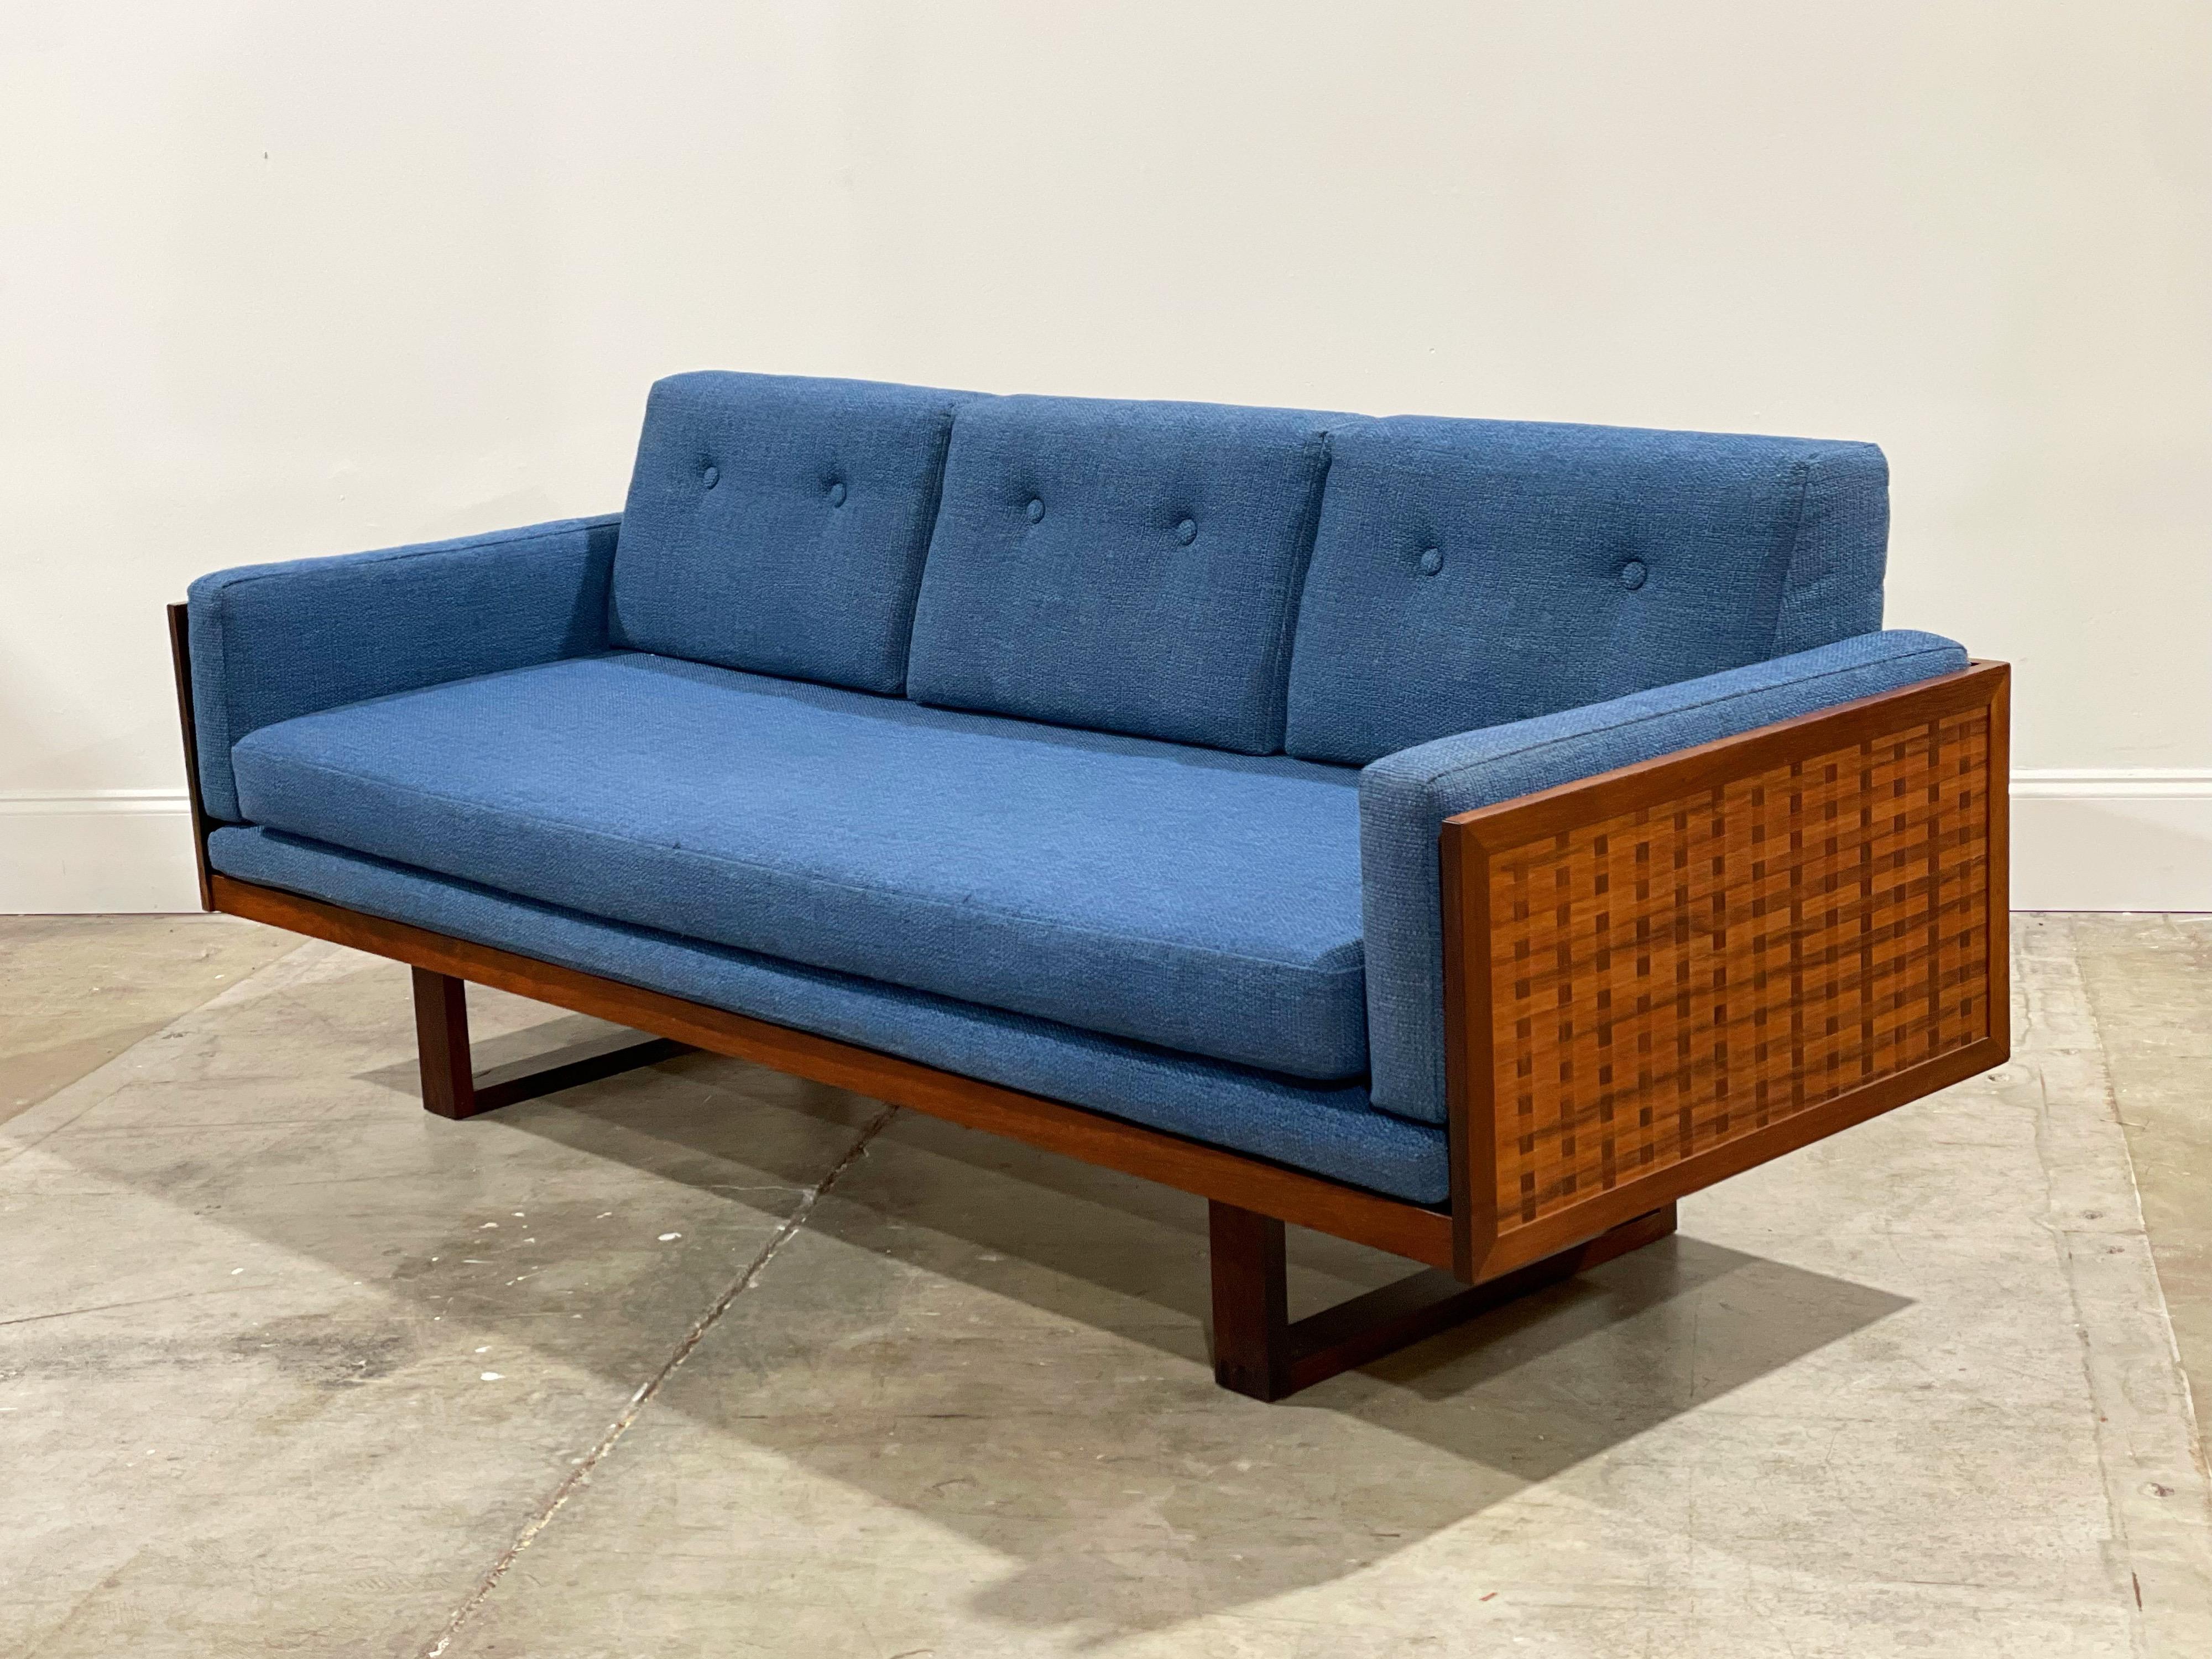 Rare basketweave sofa by Poul Cadovius for France and Son in rosewood and blue wool tweed. Exceptional craftsmanship and exquisite design. These don't come to market stateside very often - this particular example is the only 3 seat version for sale